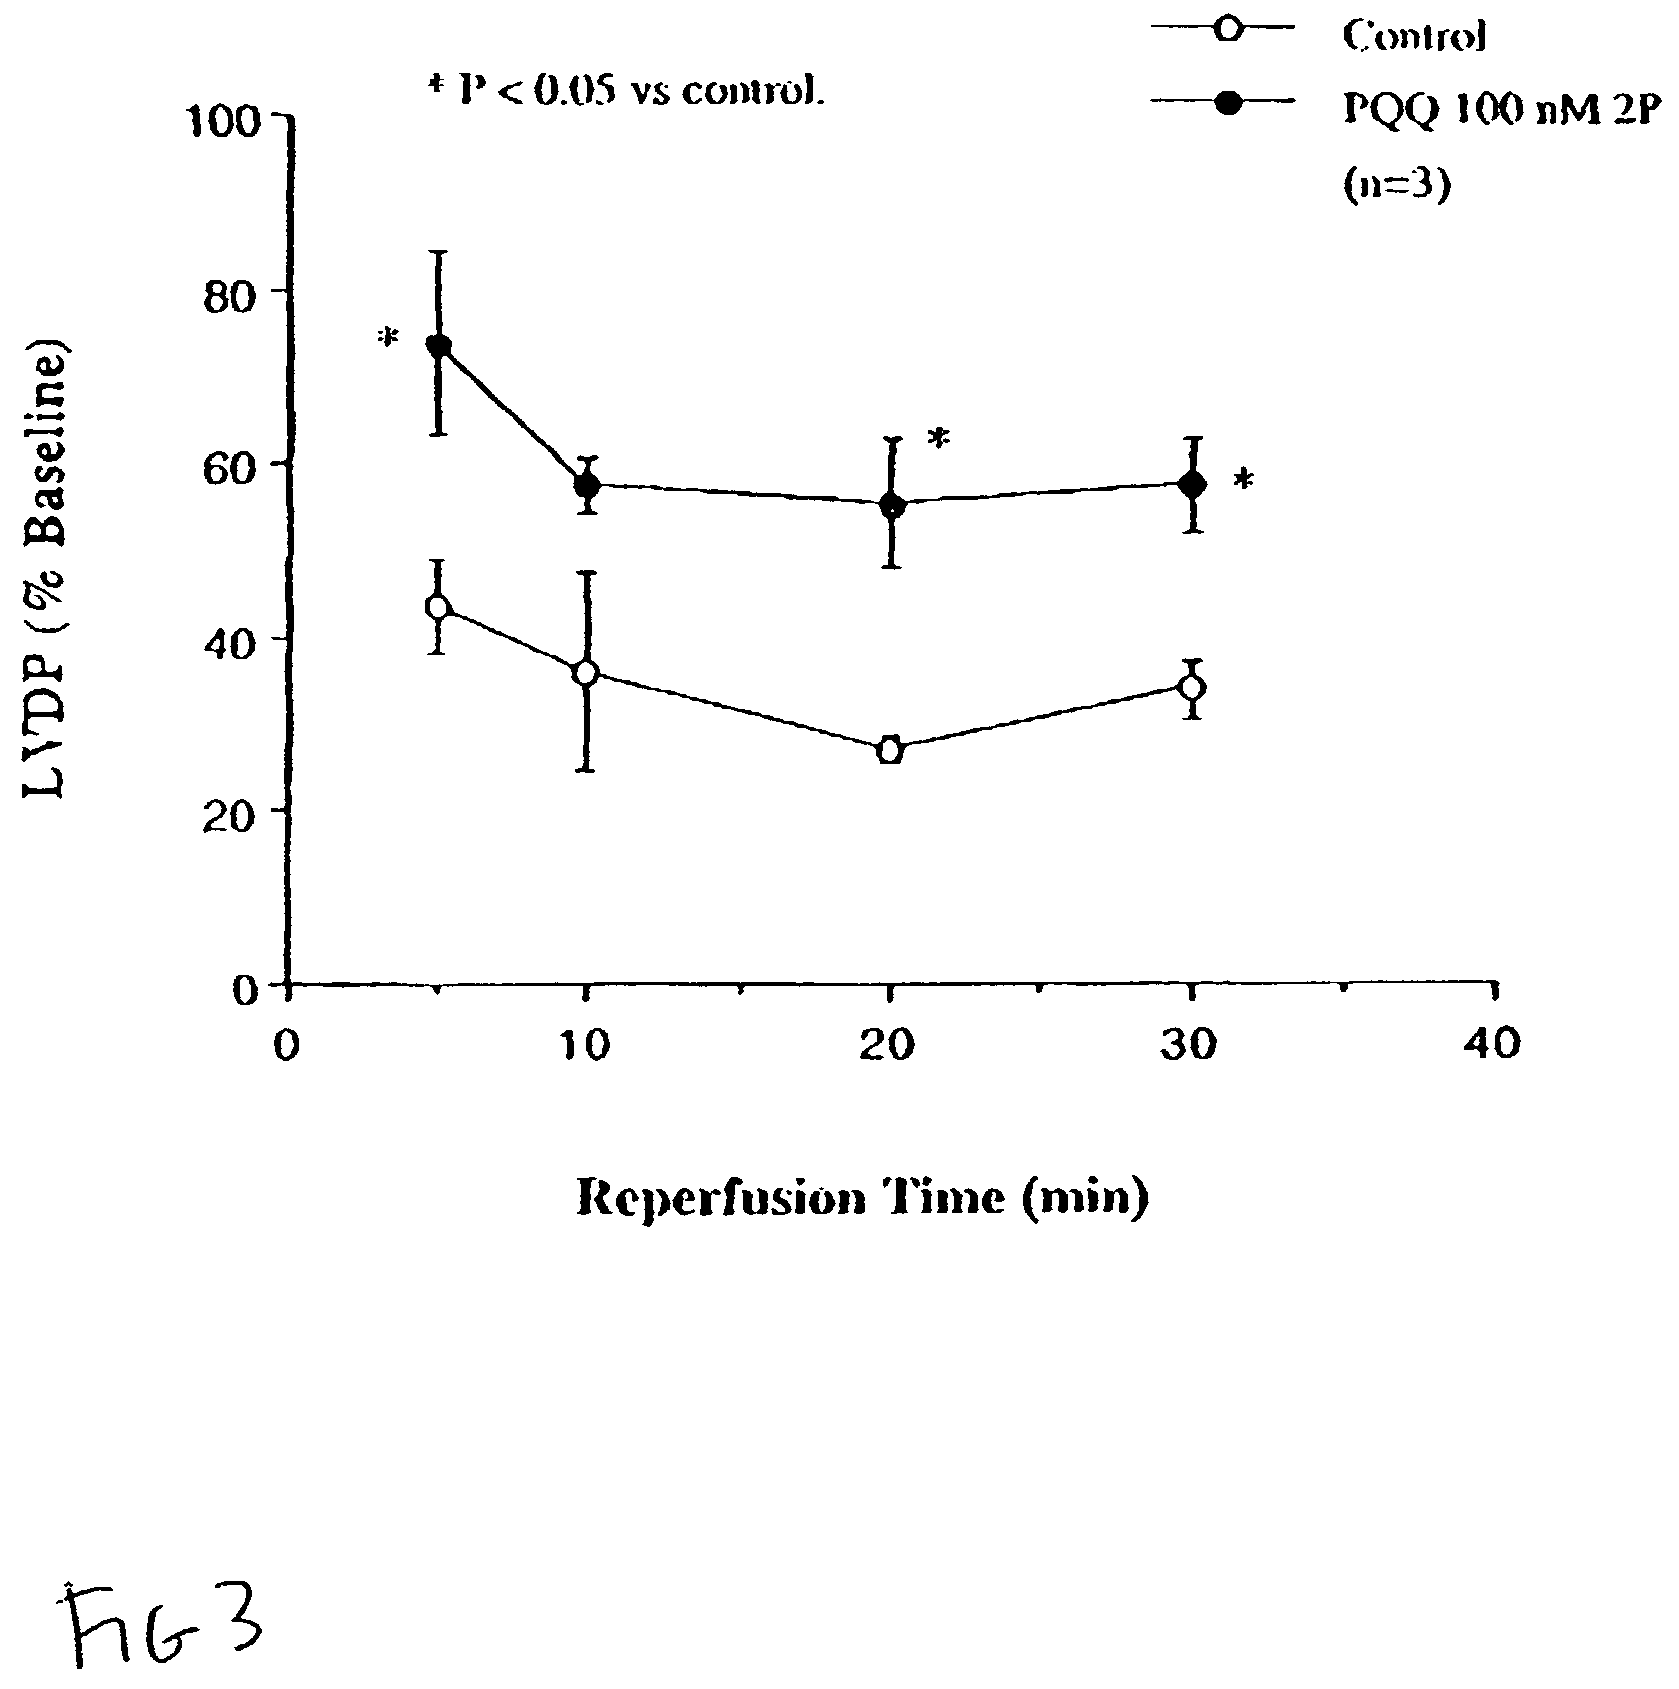 Pyrroloquinoline quinone drugs for treatment of cardiac injury and methods of use thereof